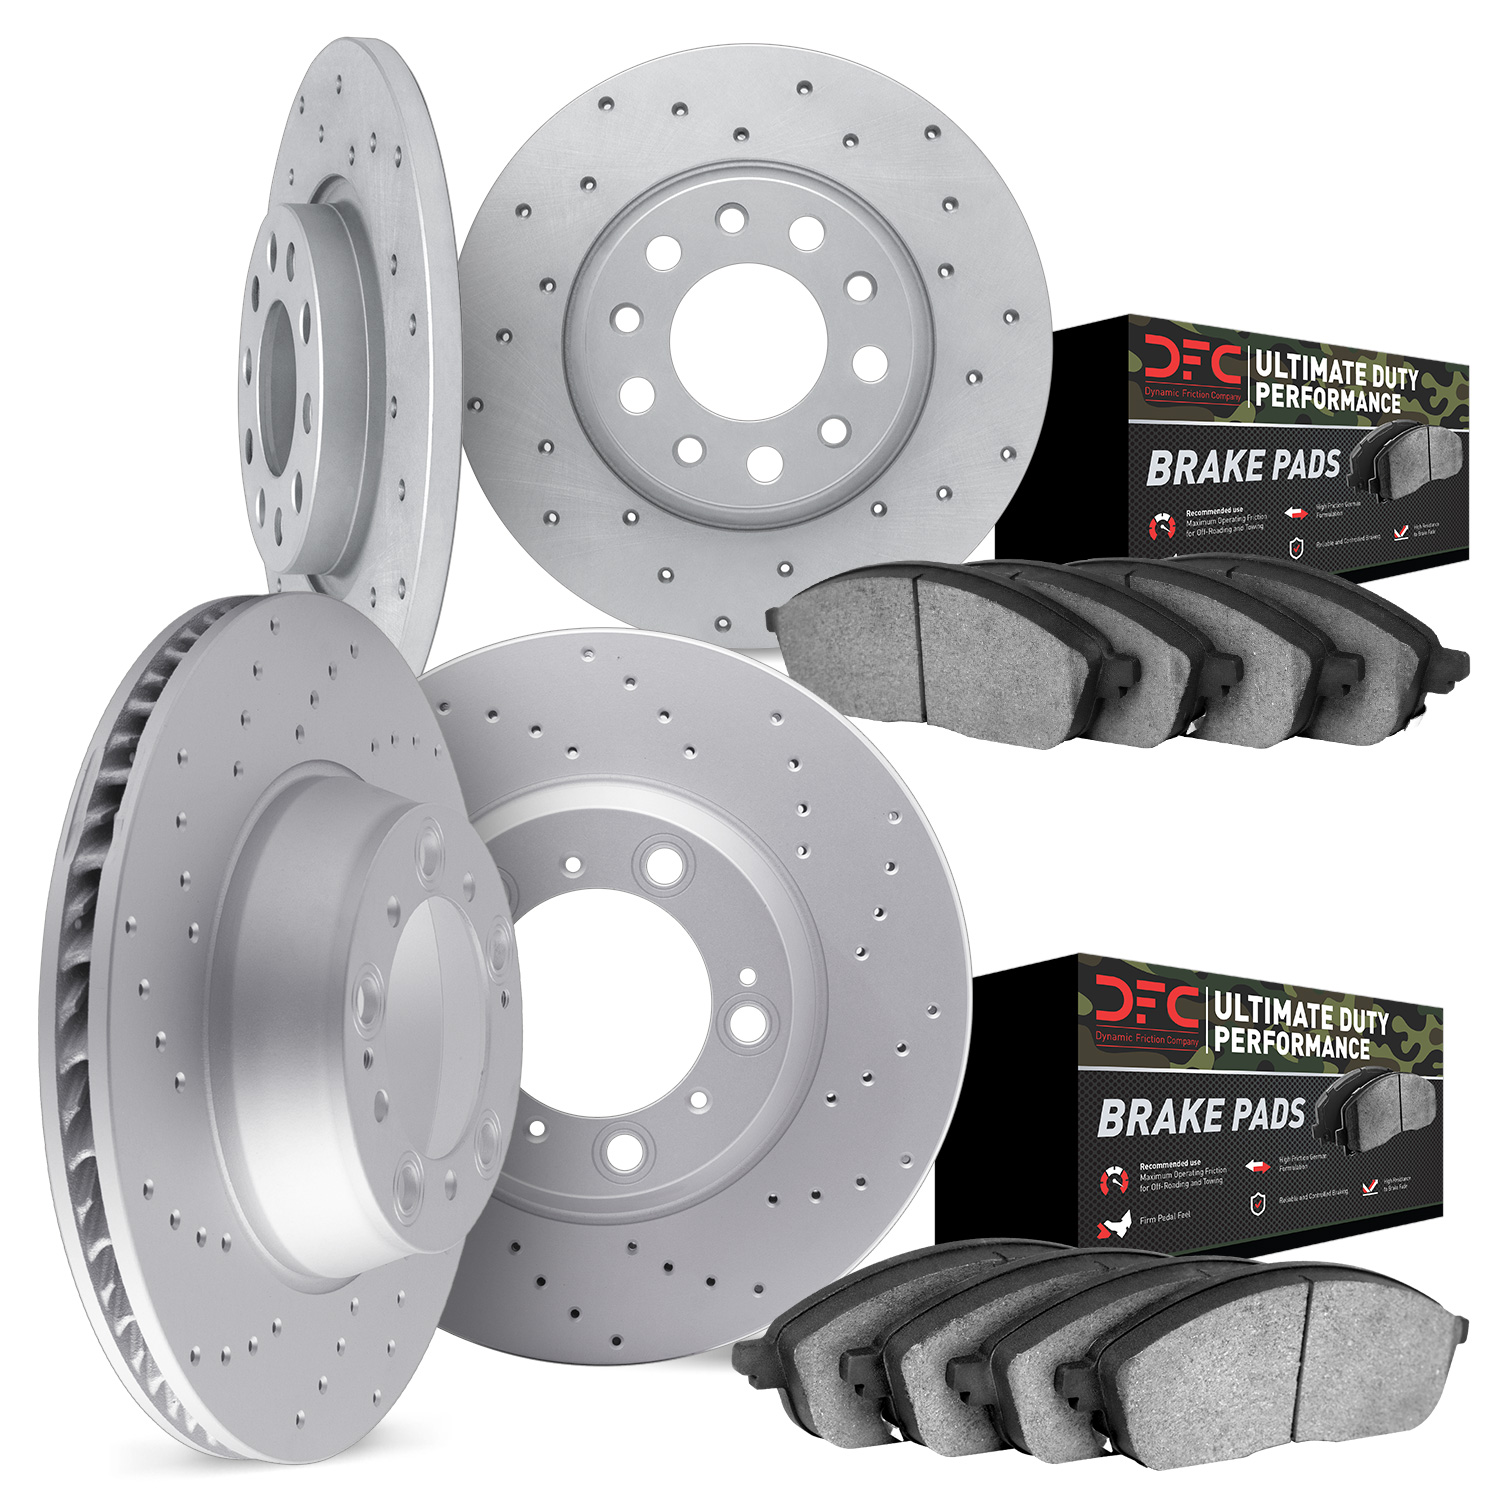 2404-42000 Geoperformance Drilled Brake Rotors with Ultimate-Duty Brake Pads Kit, 2005-2010 Mopar, Position: Front and Rear